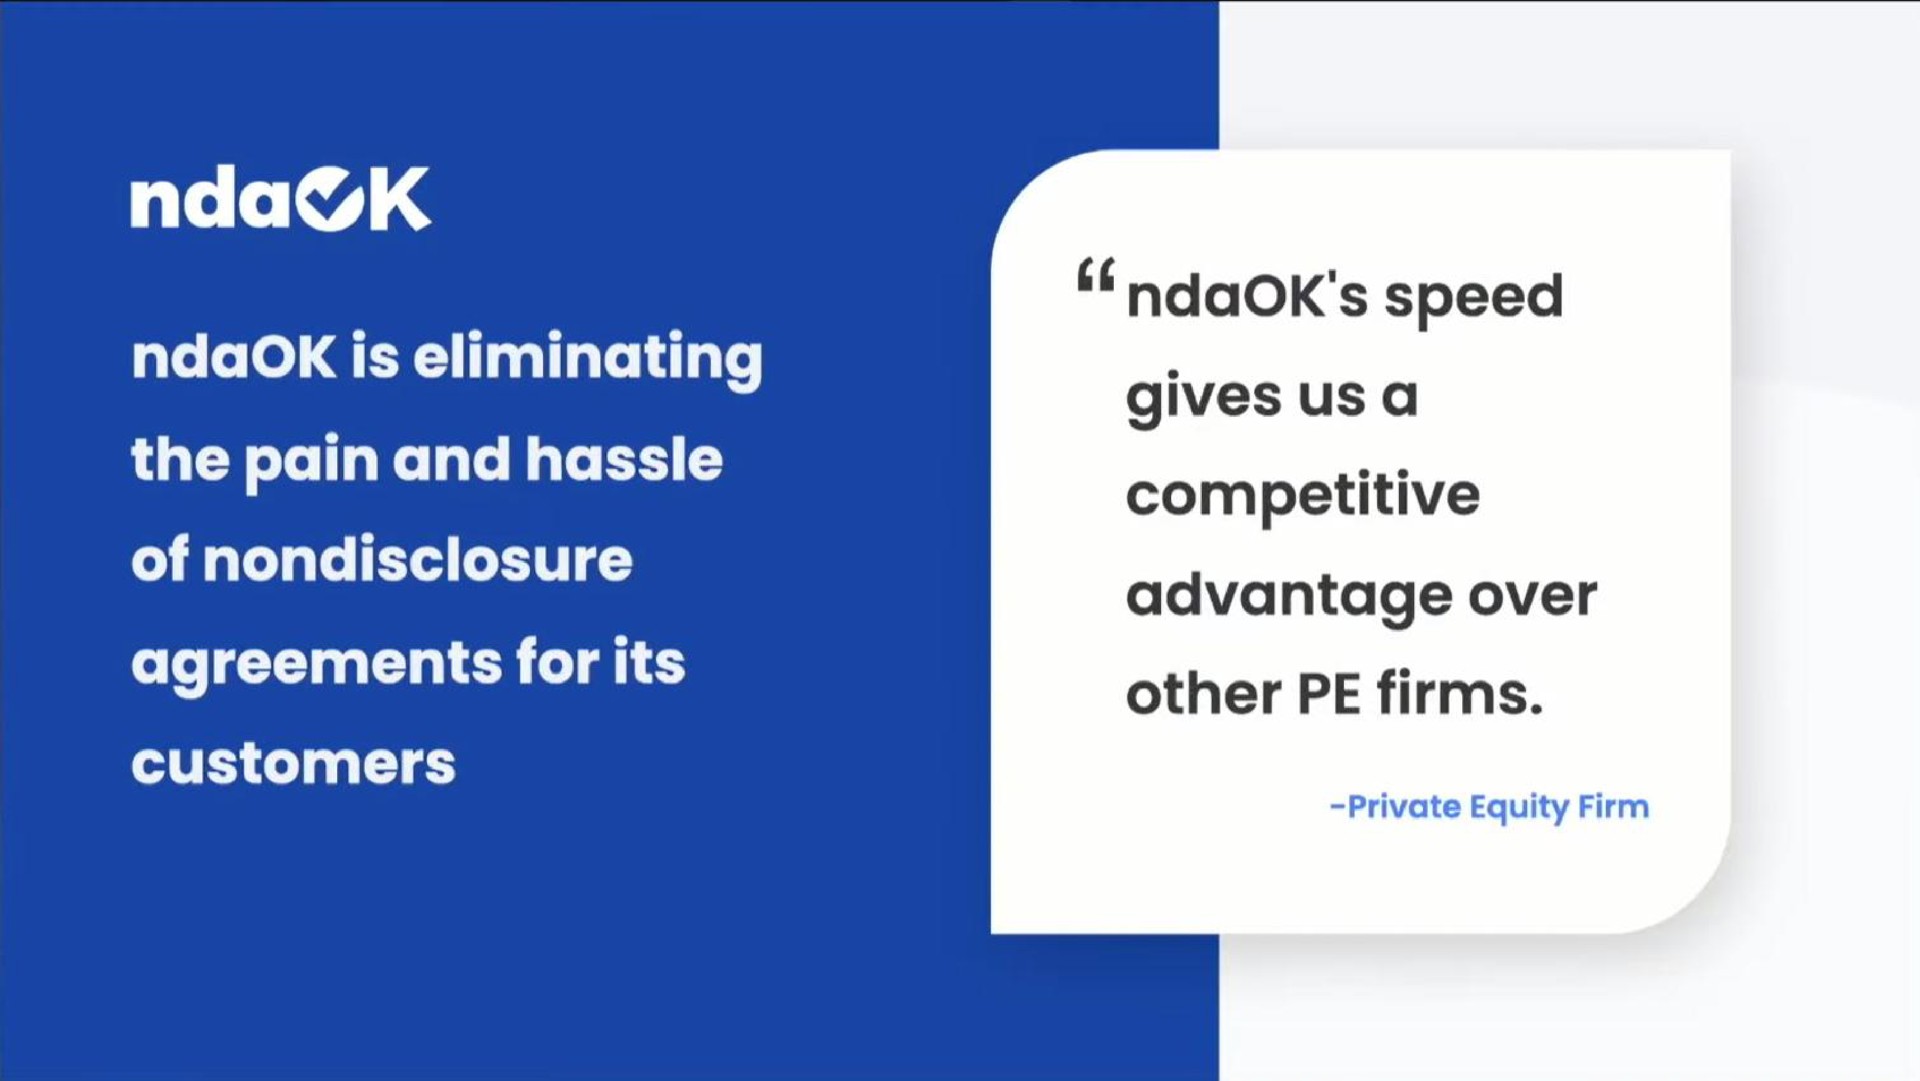 is eliminating the pain and hassle of nondisclosure agreements for its customers speed gives competitive other firms advantage over | ndaOK